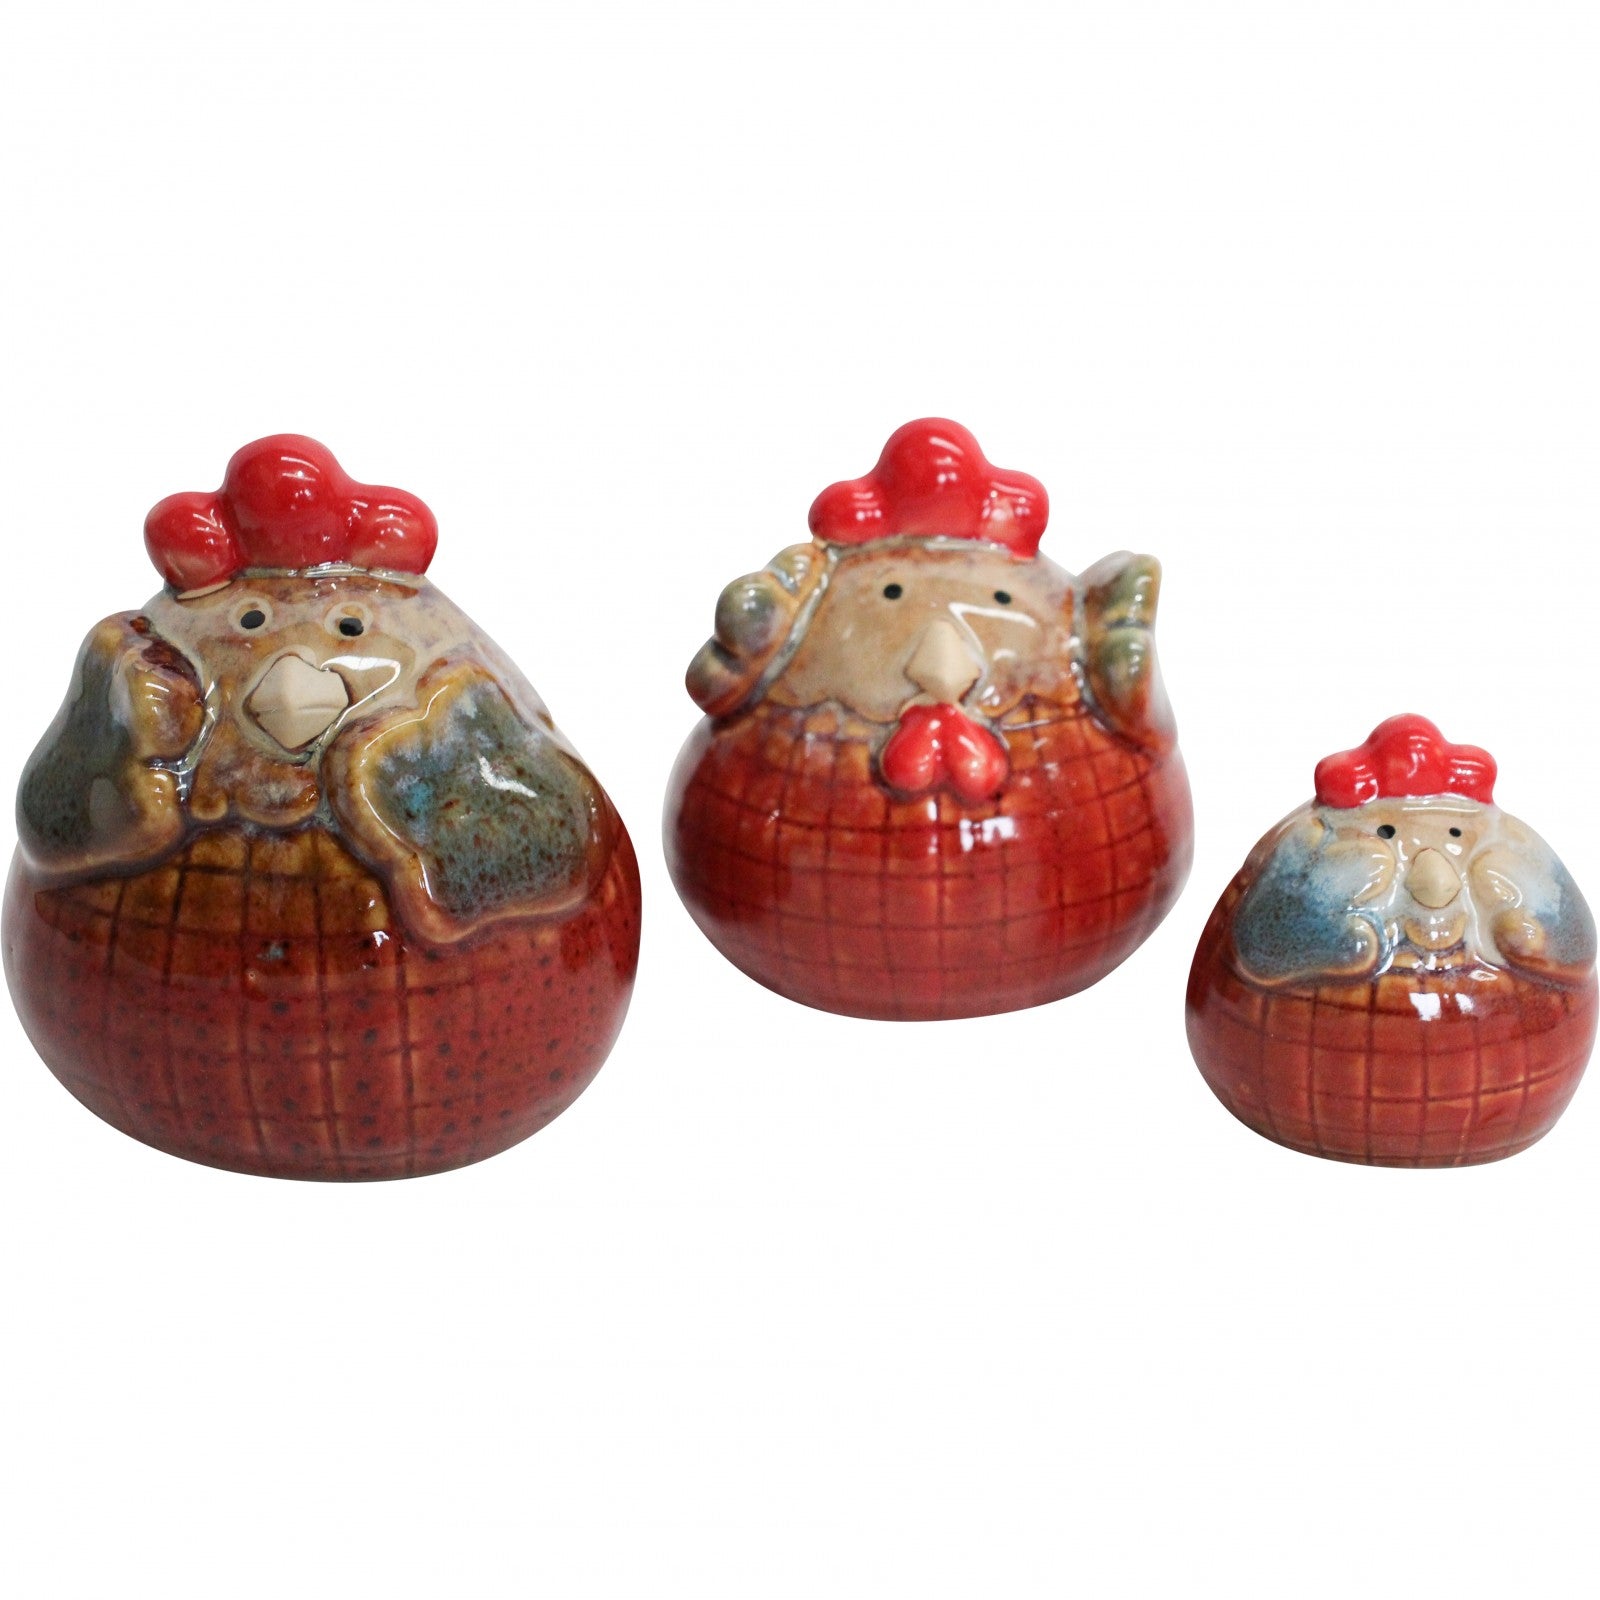 Chicken Rooster Set of 3 Tartan Ornament - The Renmy Store Homewares & Gifts 